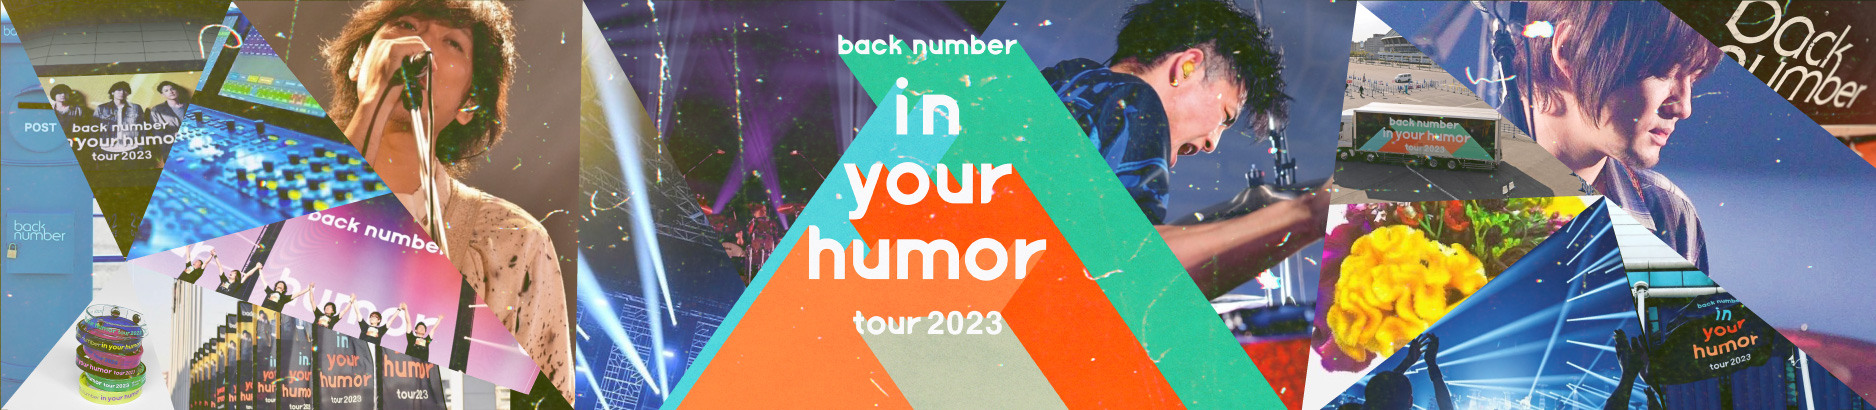 「back number "in your humor tour 2023"」開催決定！